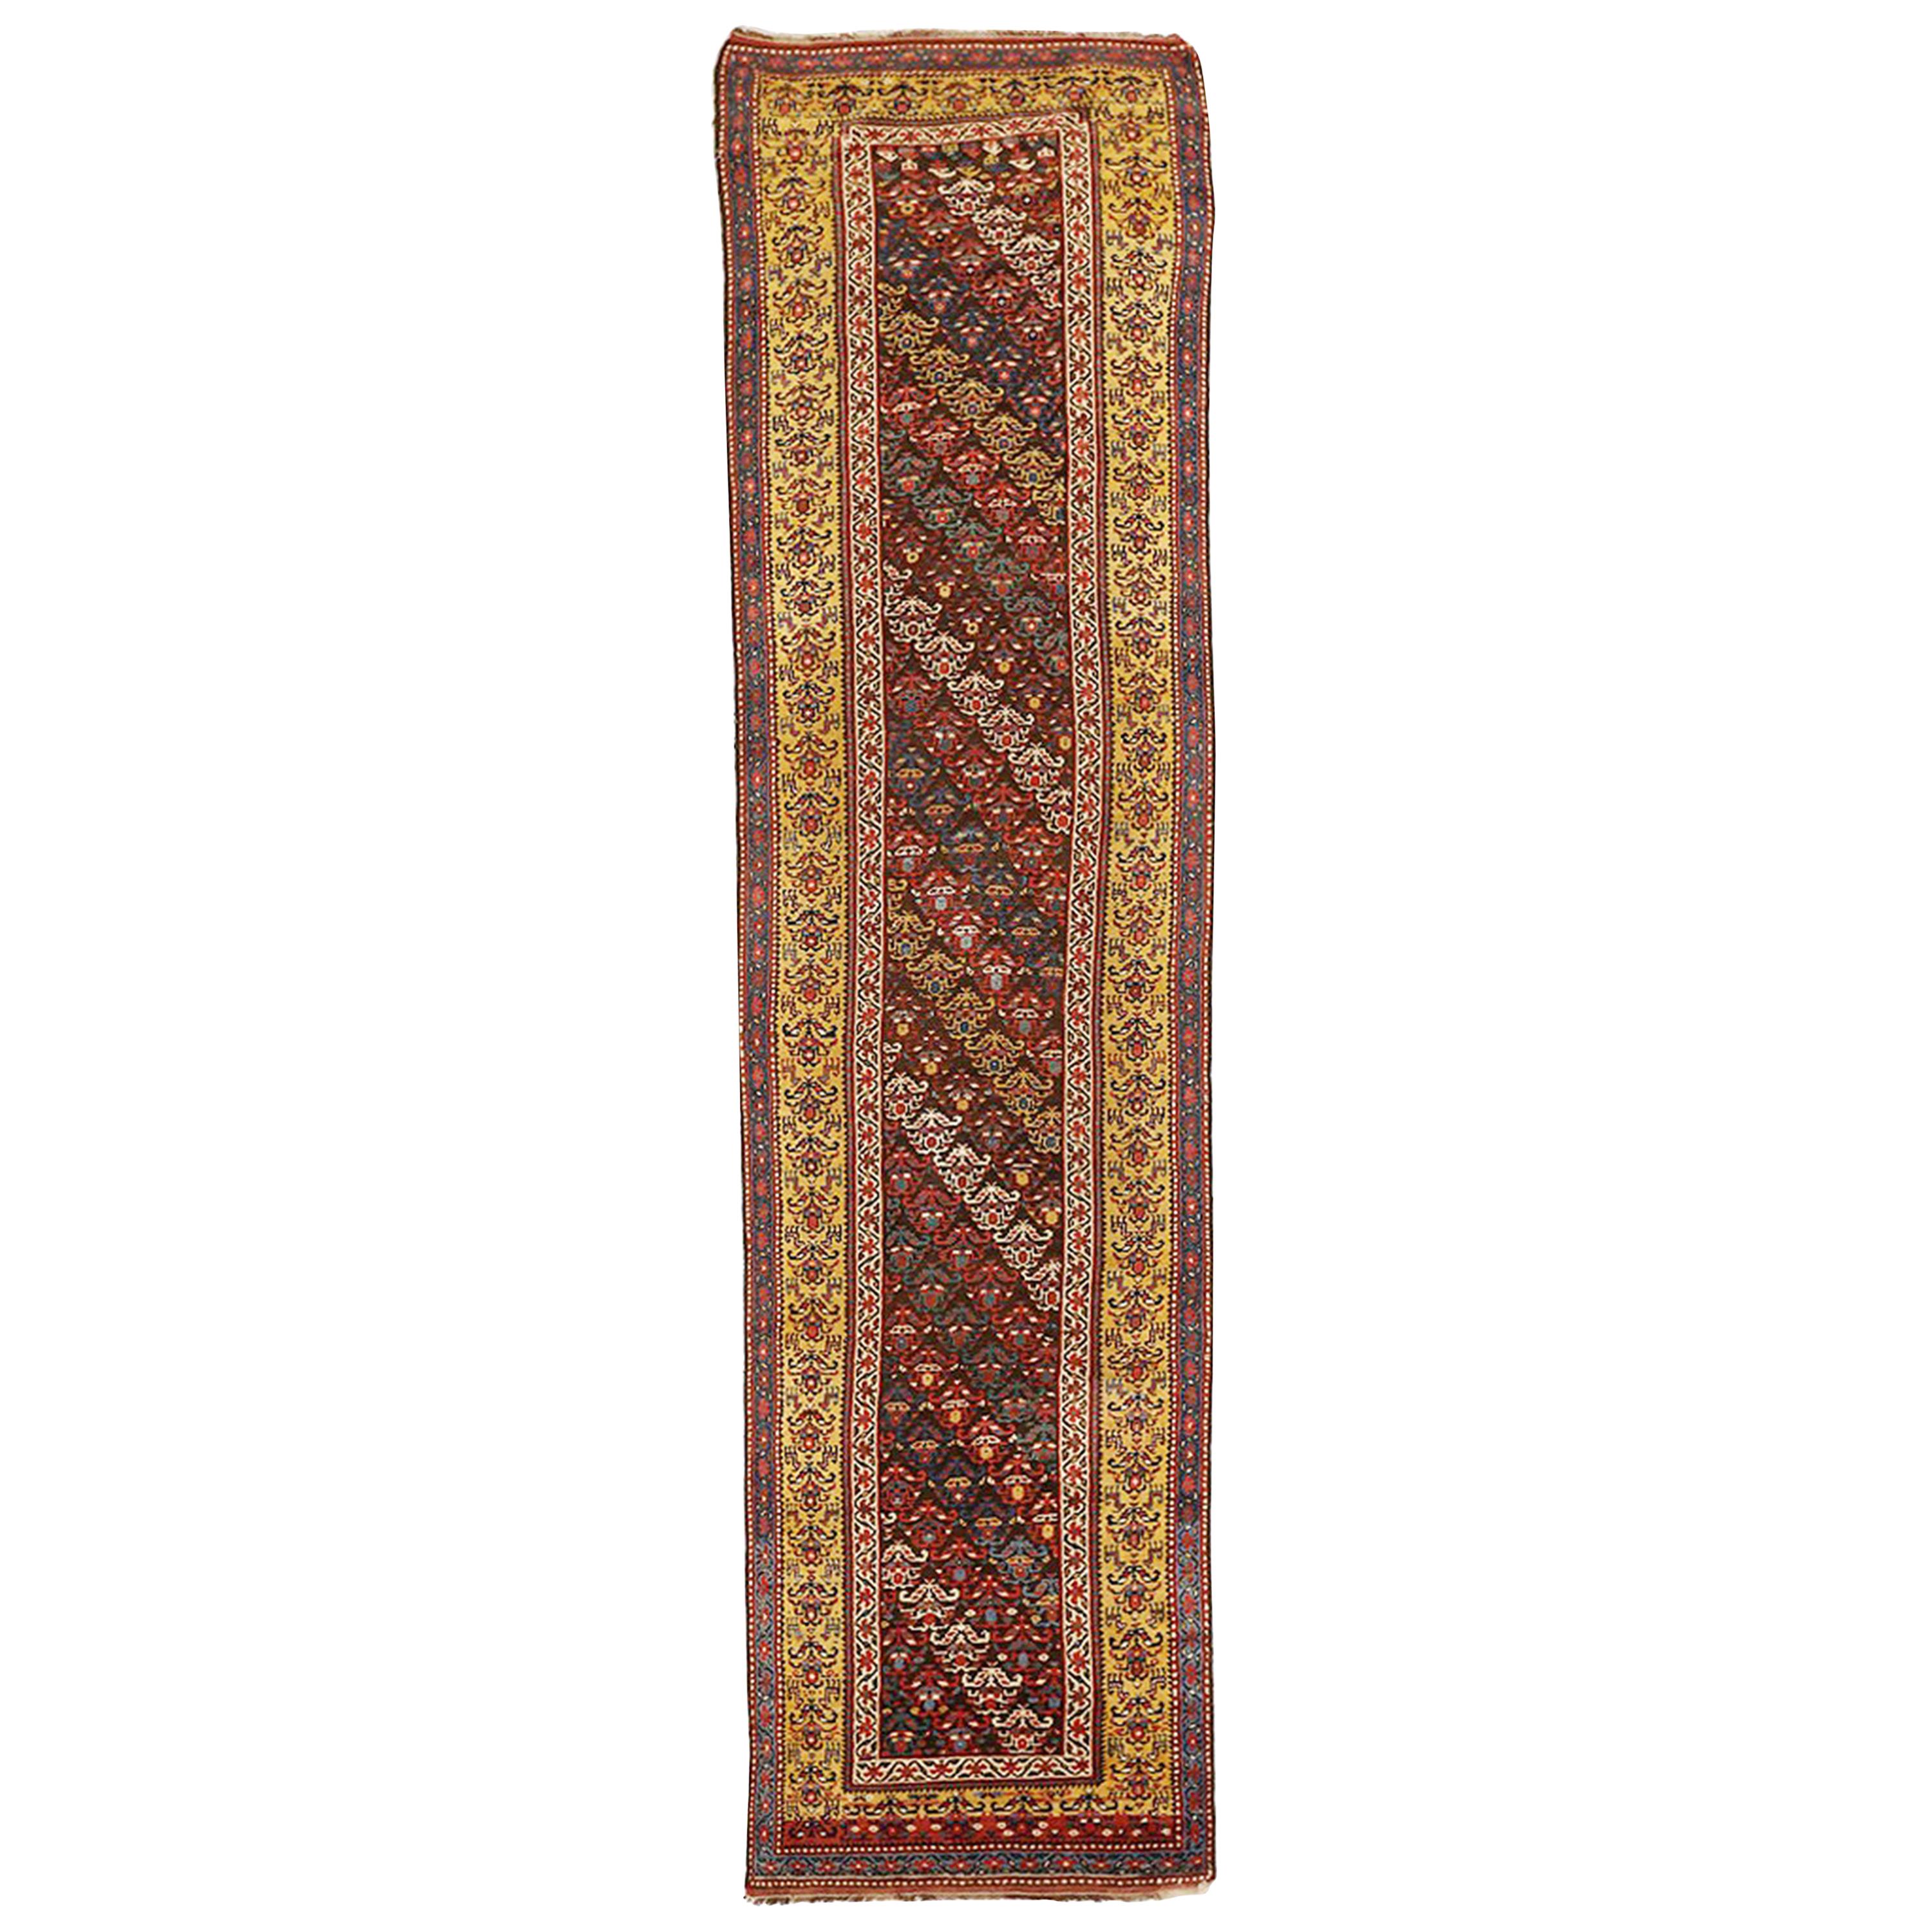 20th Century Antique Azerbaijan Runner Rug with Colored Floral Motifs All-Over For Sale